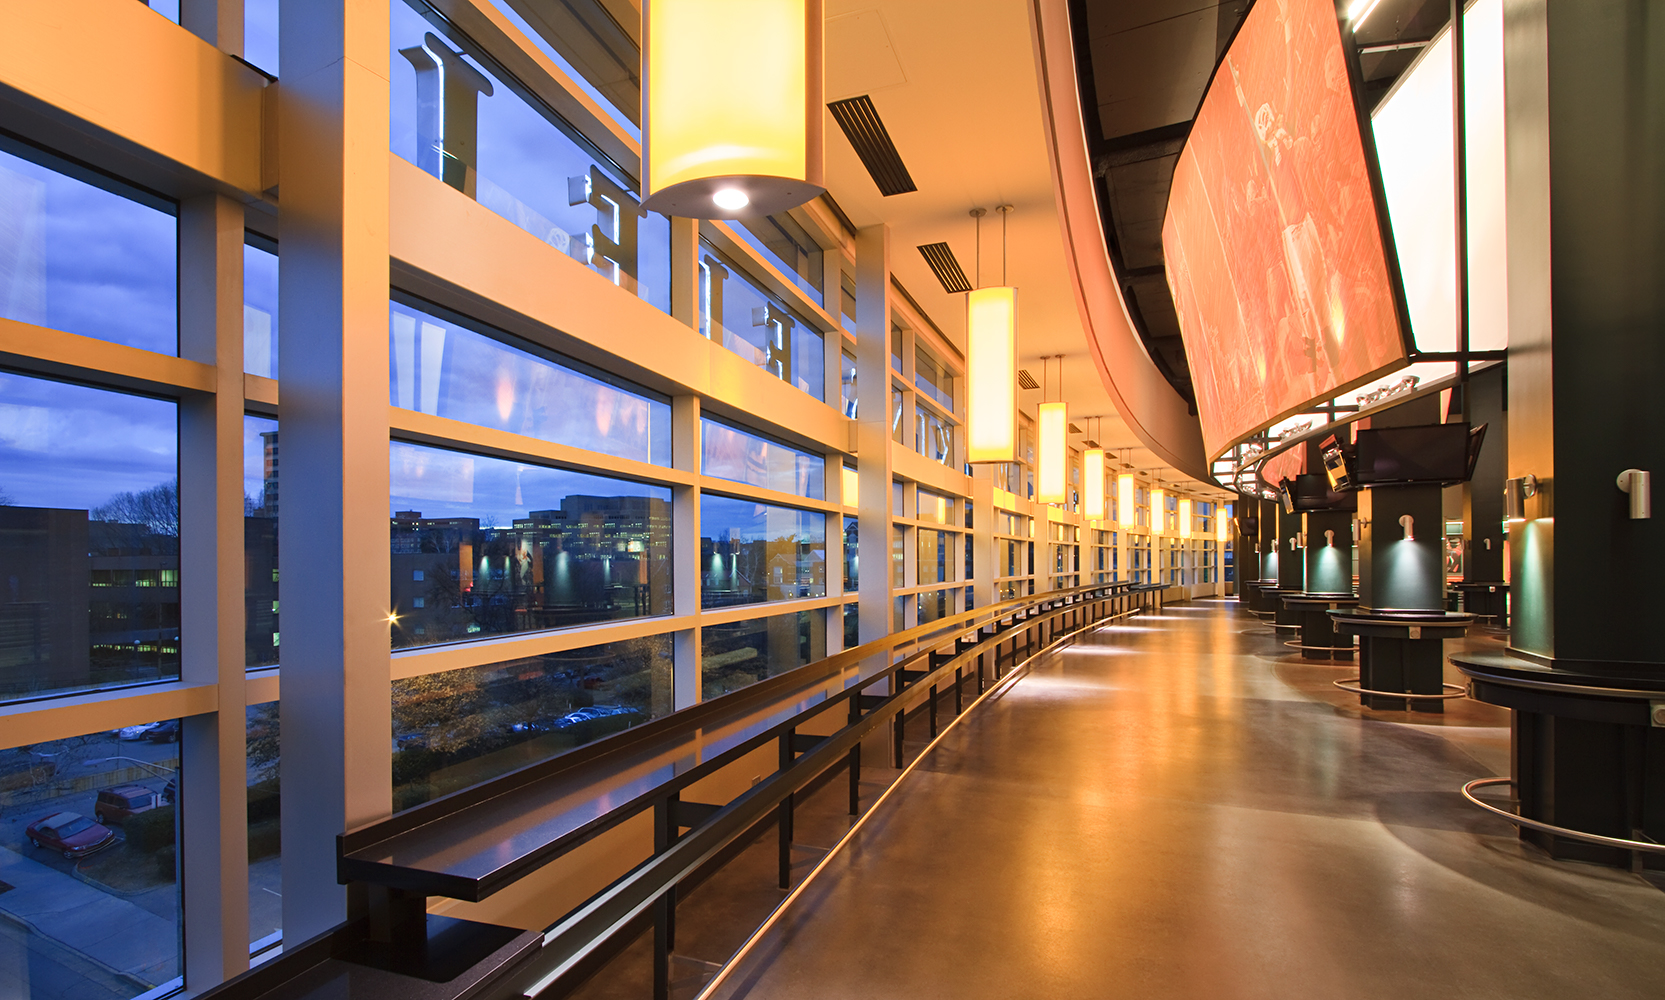 Air Foil education lighting pendants mounted evenly along a curved wall in a college stadium.